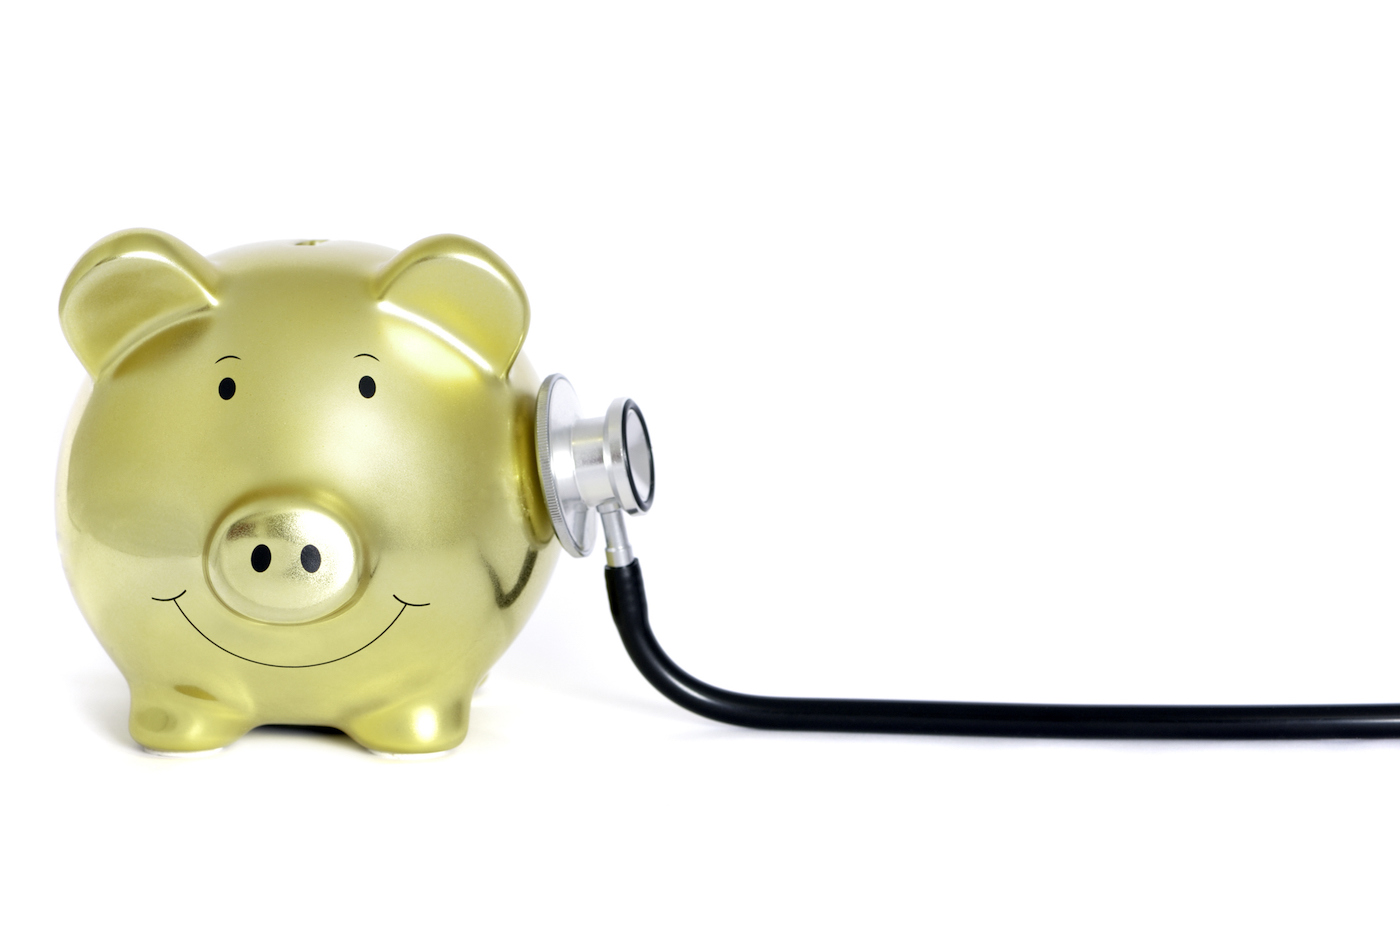 Conceptual image of a golden piggy bank and a stethoscope isolated on pure white, selective focus on the piggy bank